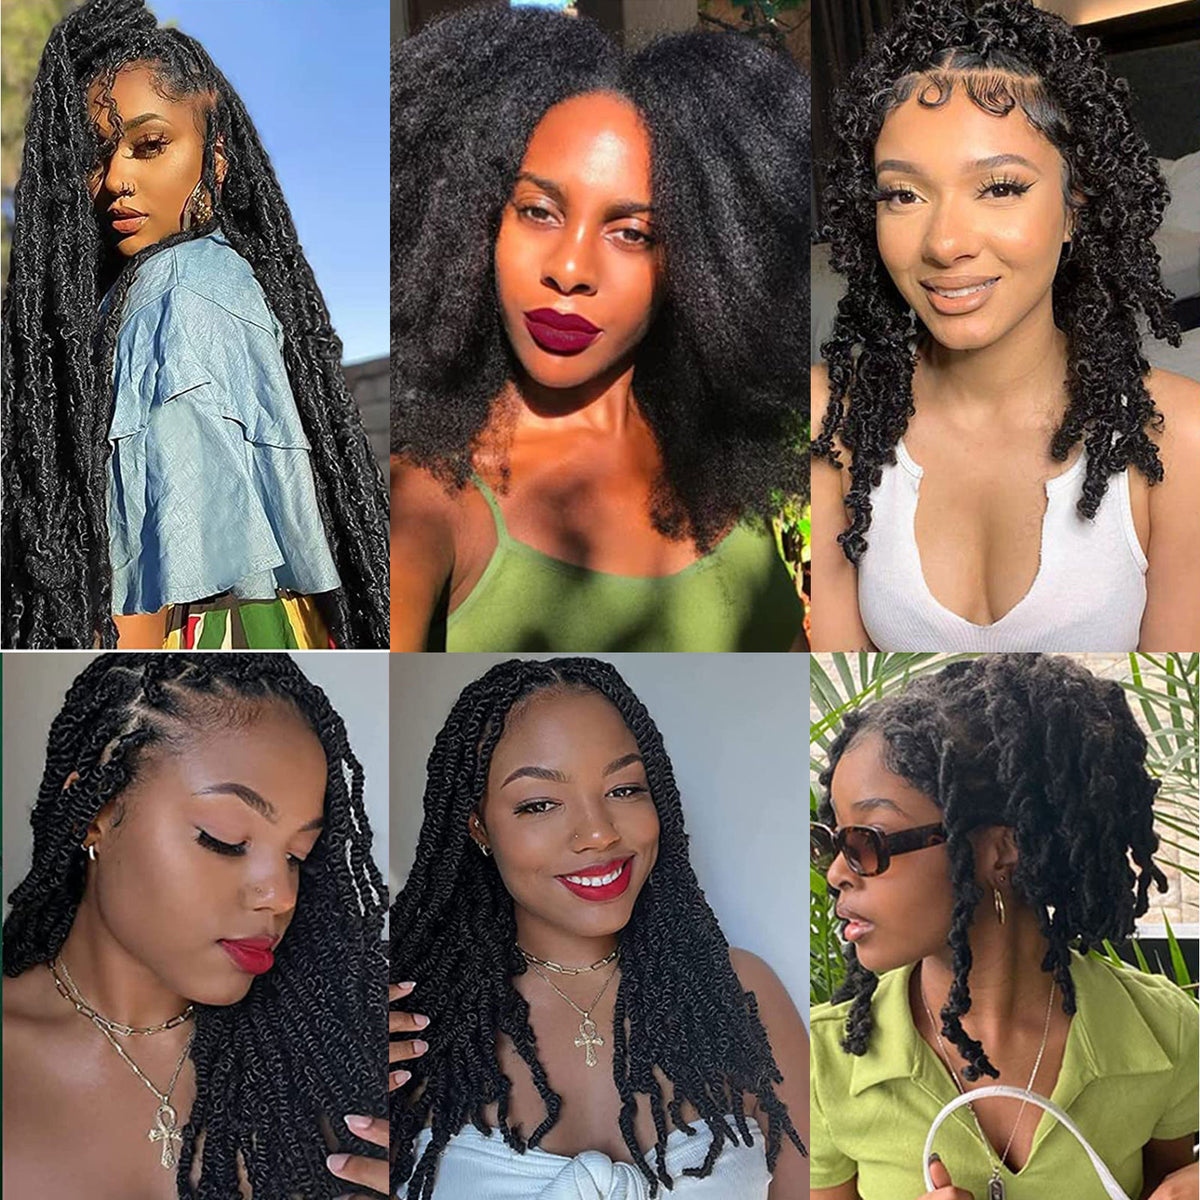 18 Inches Pack of 3 Marley Hair For Faux Locs Soft & Bouncy Cuban Twist Hair Synthetic Kanekalon Kinky Twist Hair For Braiding Crochet Marley Twist Braiding Hair For Black Woman 1B / Natural Black